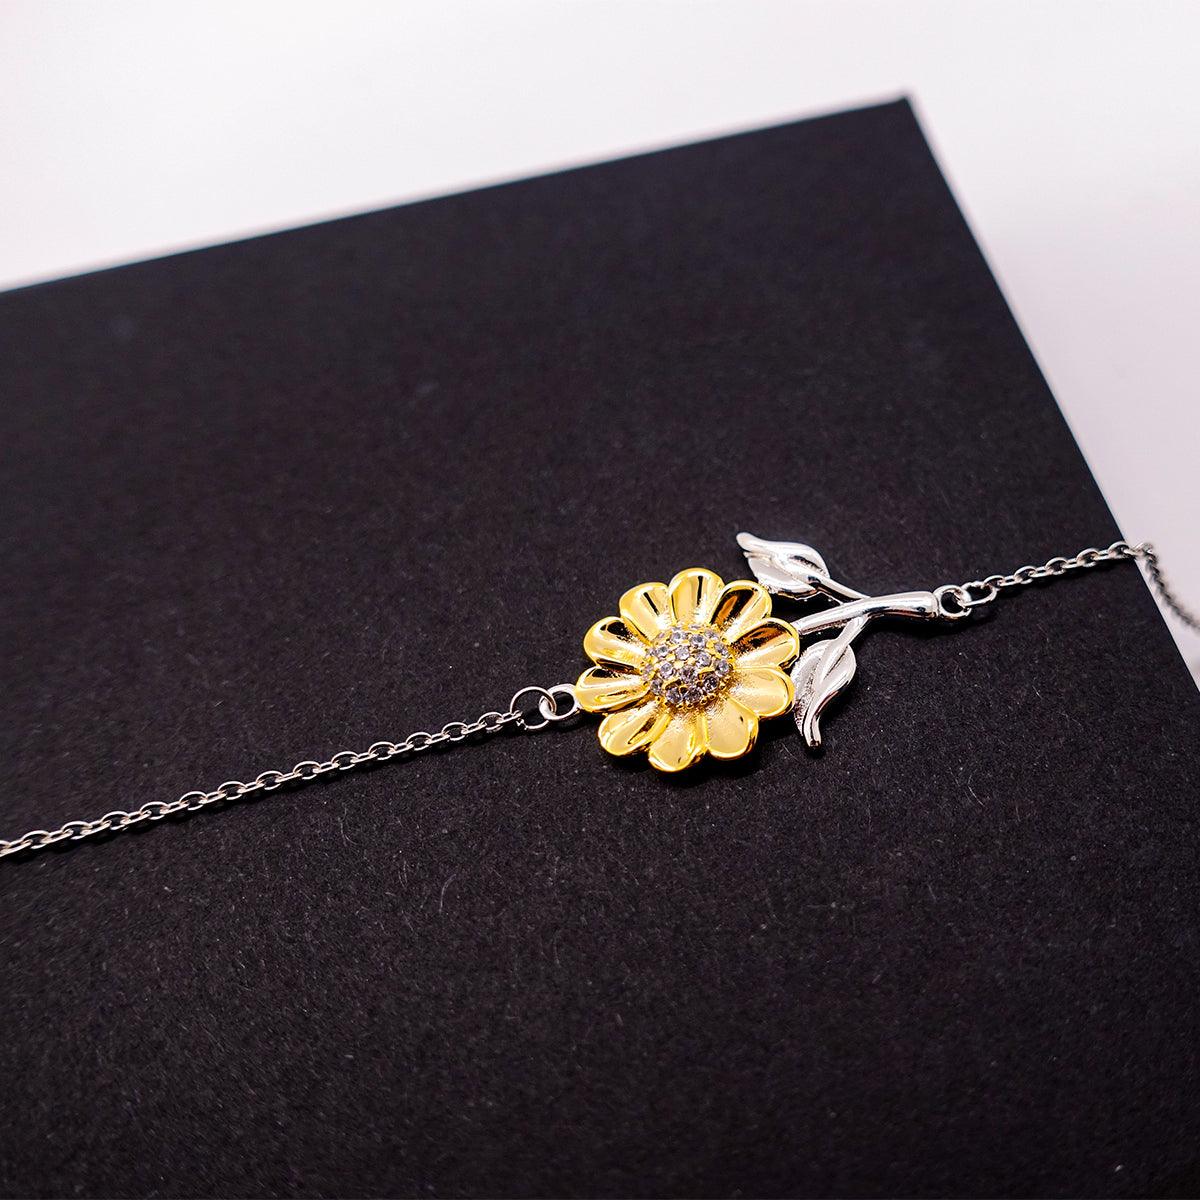 Remarkable Magistrate Gifts, Your dedication and hard work, Inspirational Birthday Christmas Unique Sunflower Bracelet For Magistrate, Coworkers, Men, Women, Friends - Mallard Moon Gift Shop